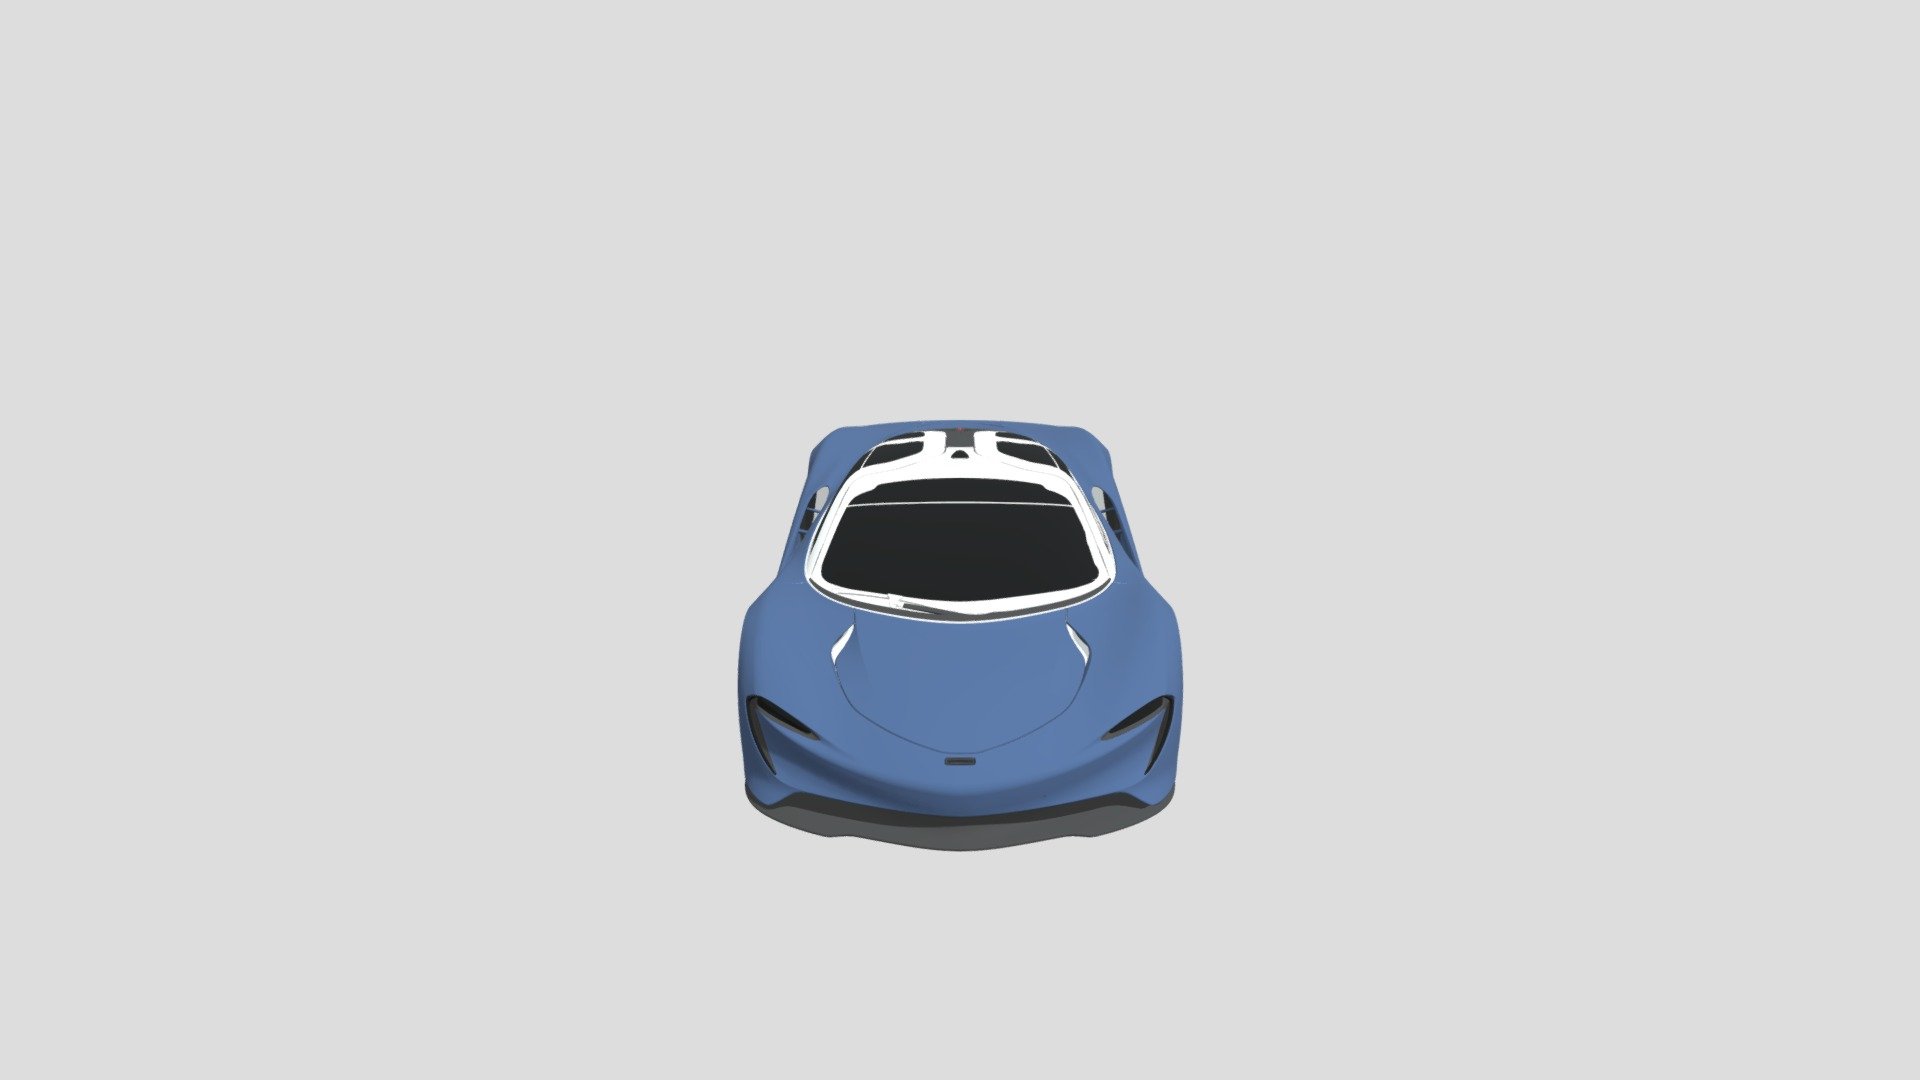 Check out the ORIGINAL Creator here https://sketchfab.com/3d-models/2019-mclaren-speedtail-fc843808d0154a39b87628a2ec2c9397
You ~~can~~ MUST check it out before commenting
This is not intended for commercial use 3d model